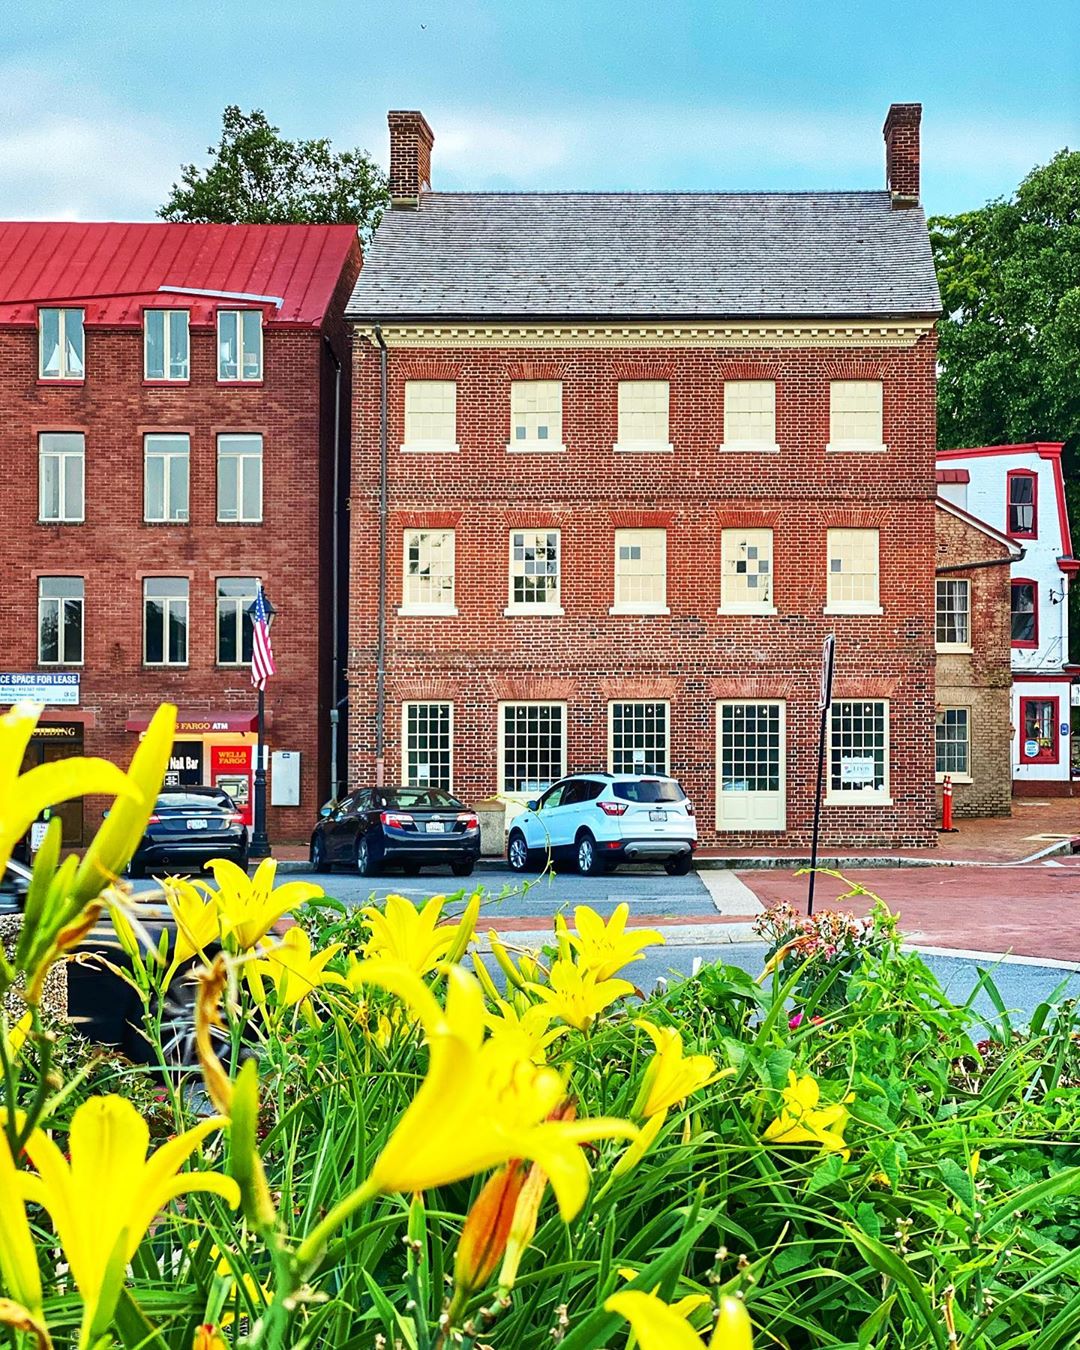 Old Buildings in Annapolis, MD. Photo by Instagram User @lenadrlena